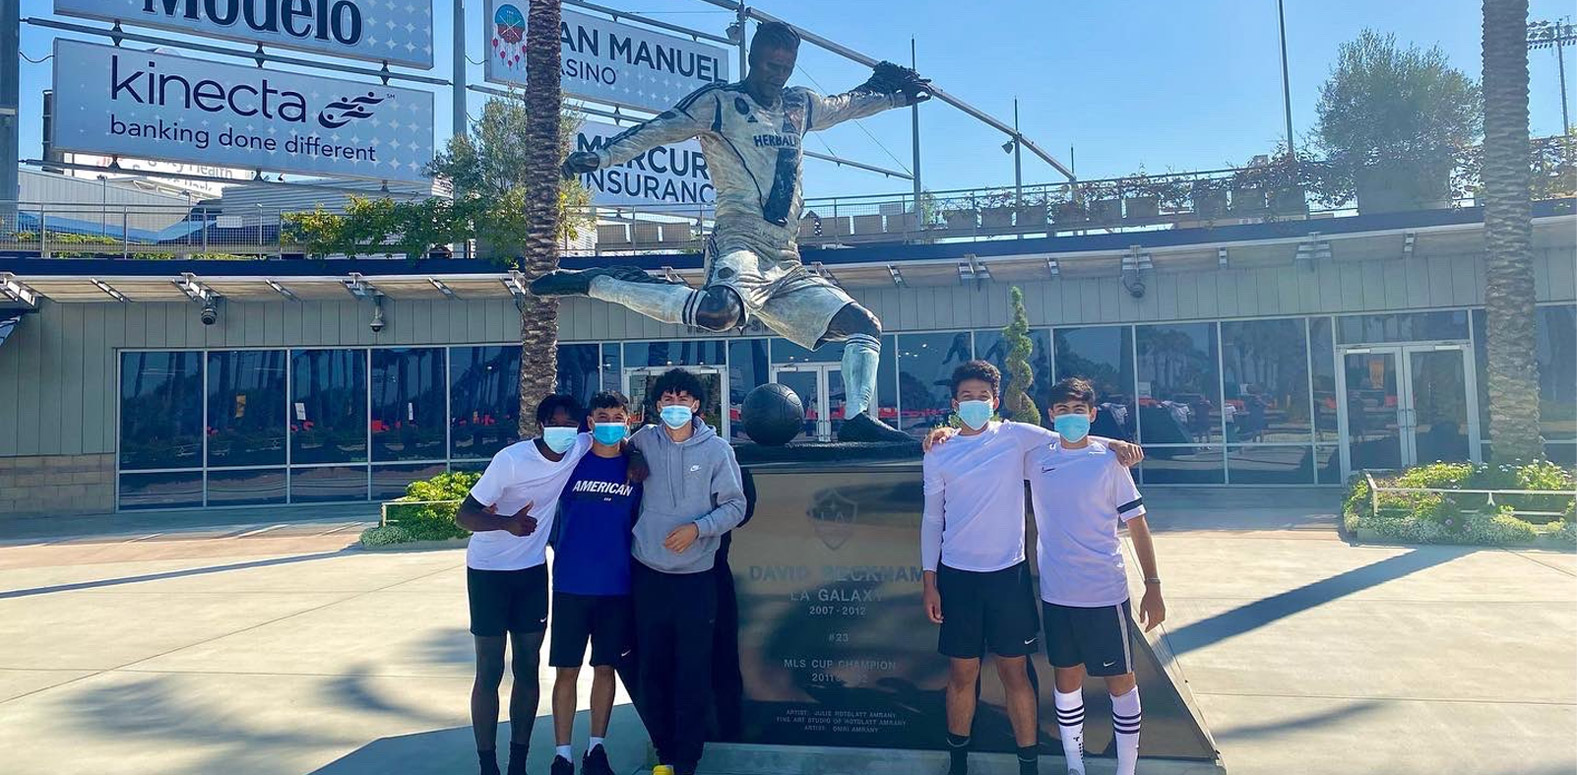 Barca Residency Academy players posing for a photo outside of the Dignity Health Center in LA ahead of the U.S. Boys YNT IDC